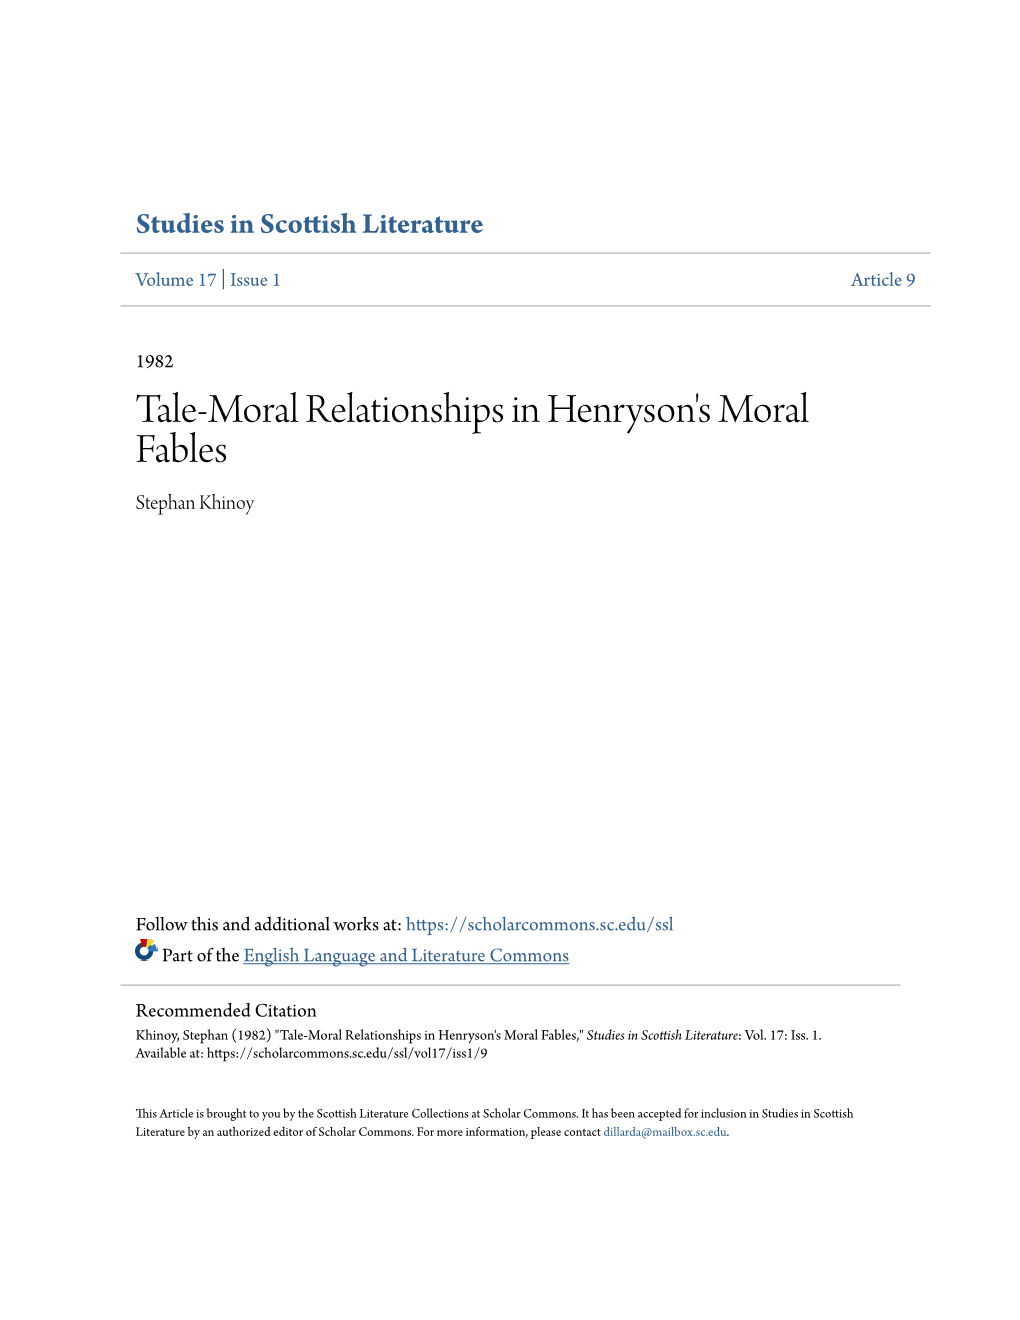 Tale-Moral Relationships in Henryson's Moral Fables Stephan Khinoy